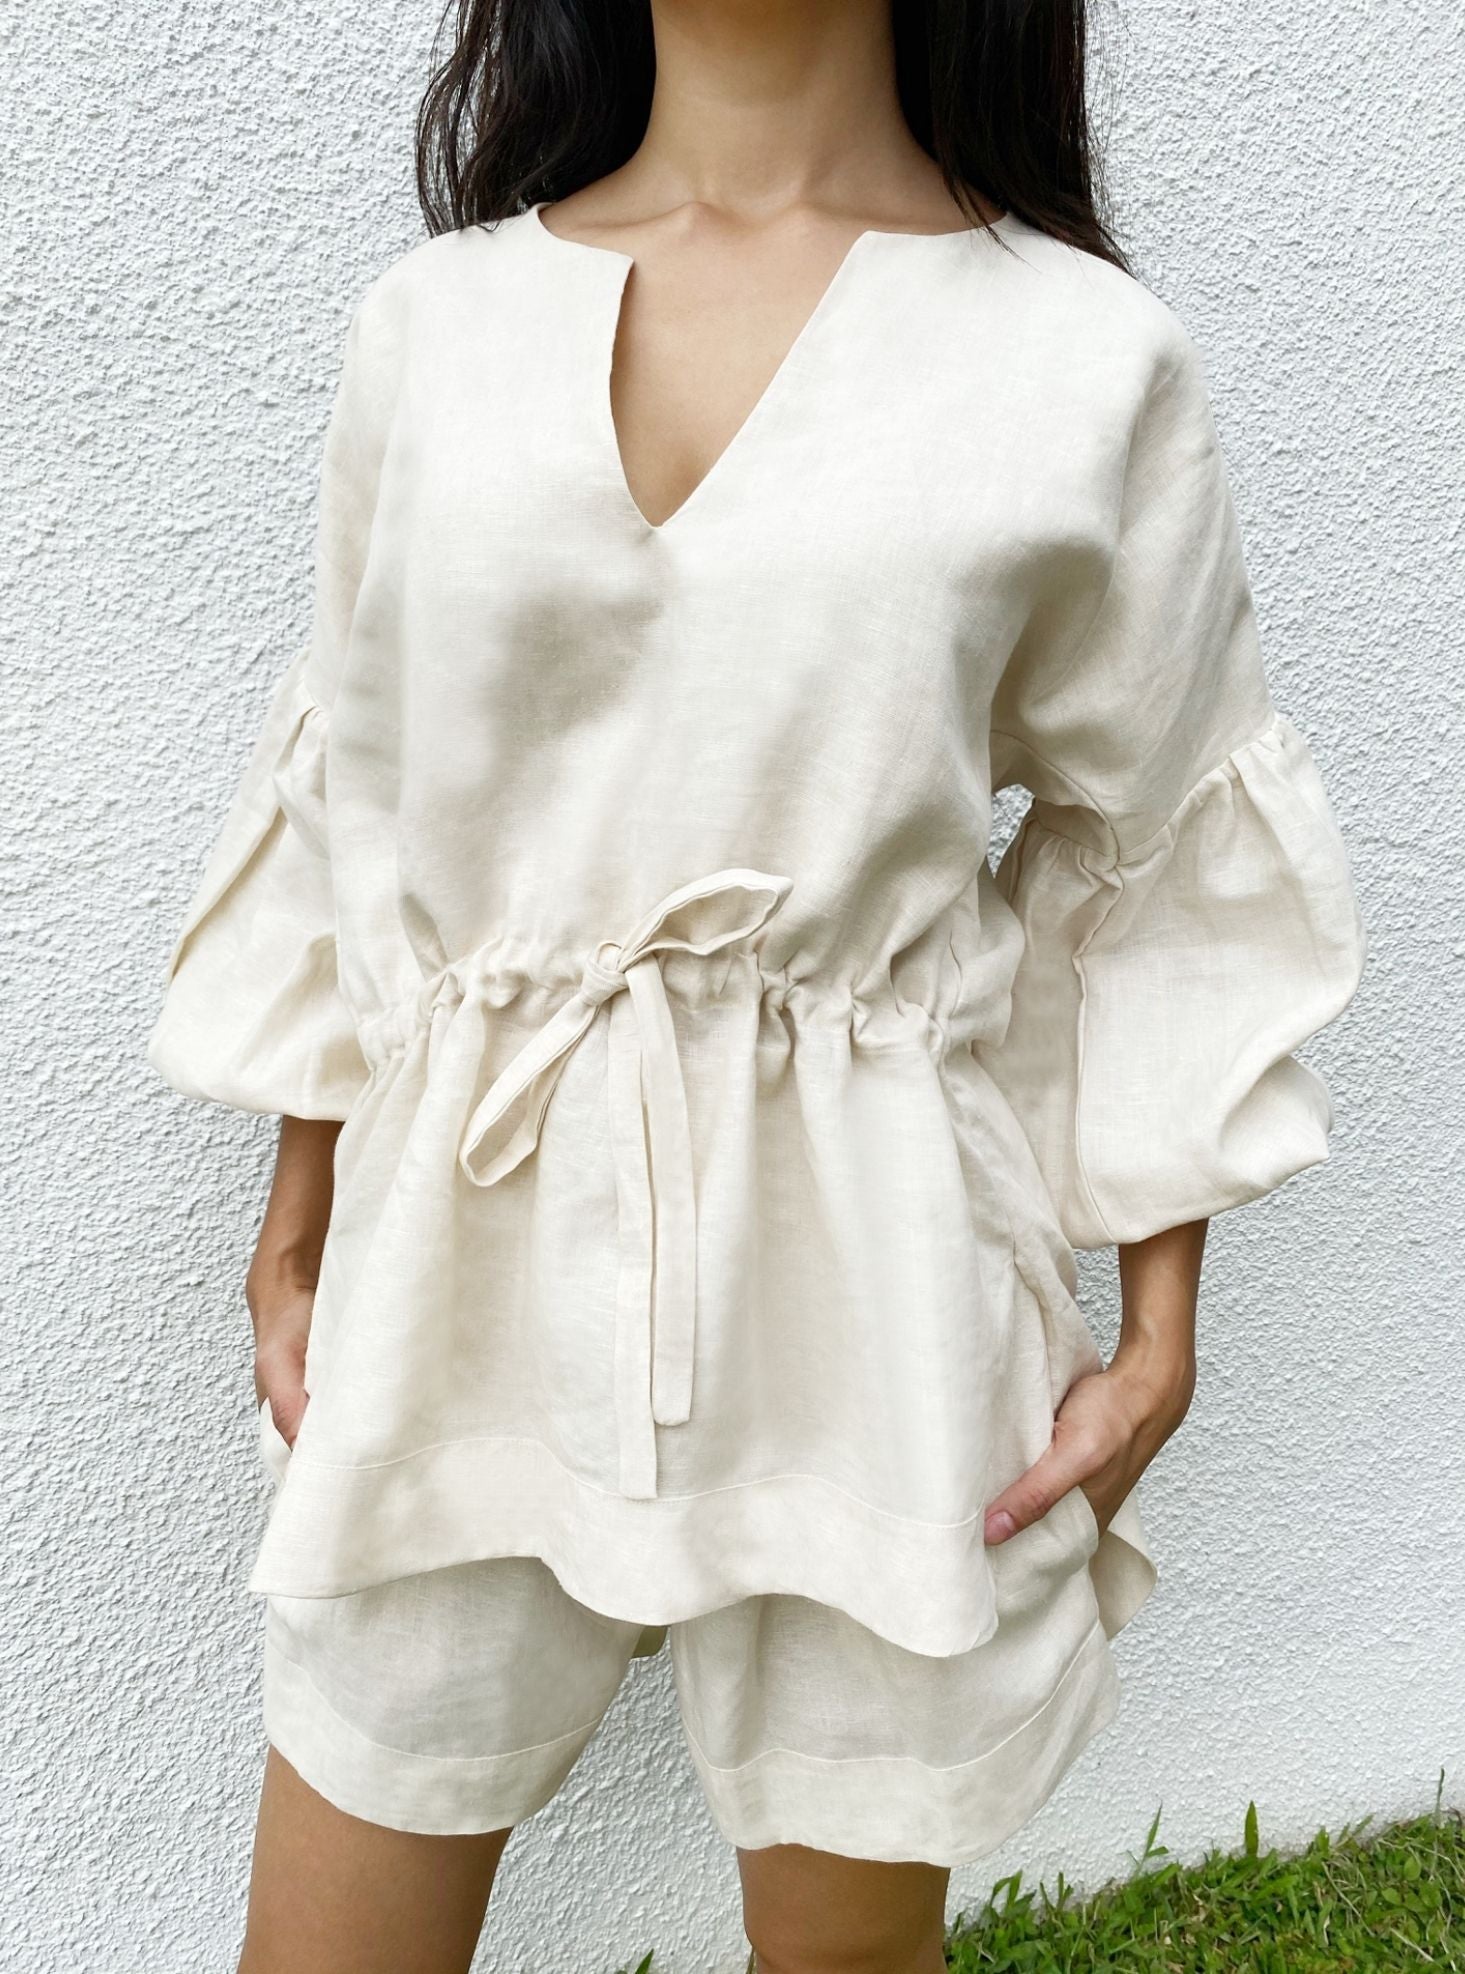 Koh Rong Linen Lounge Top in White